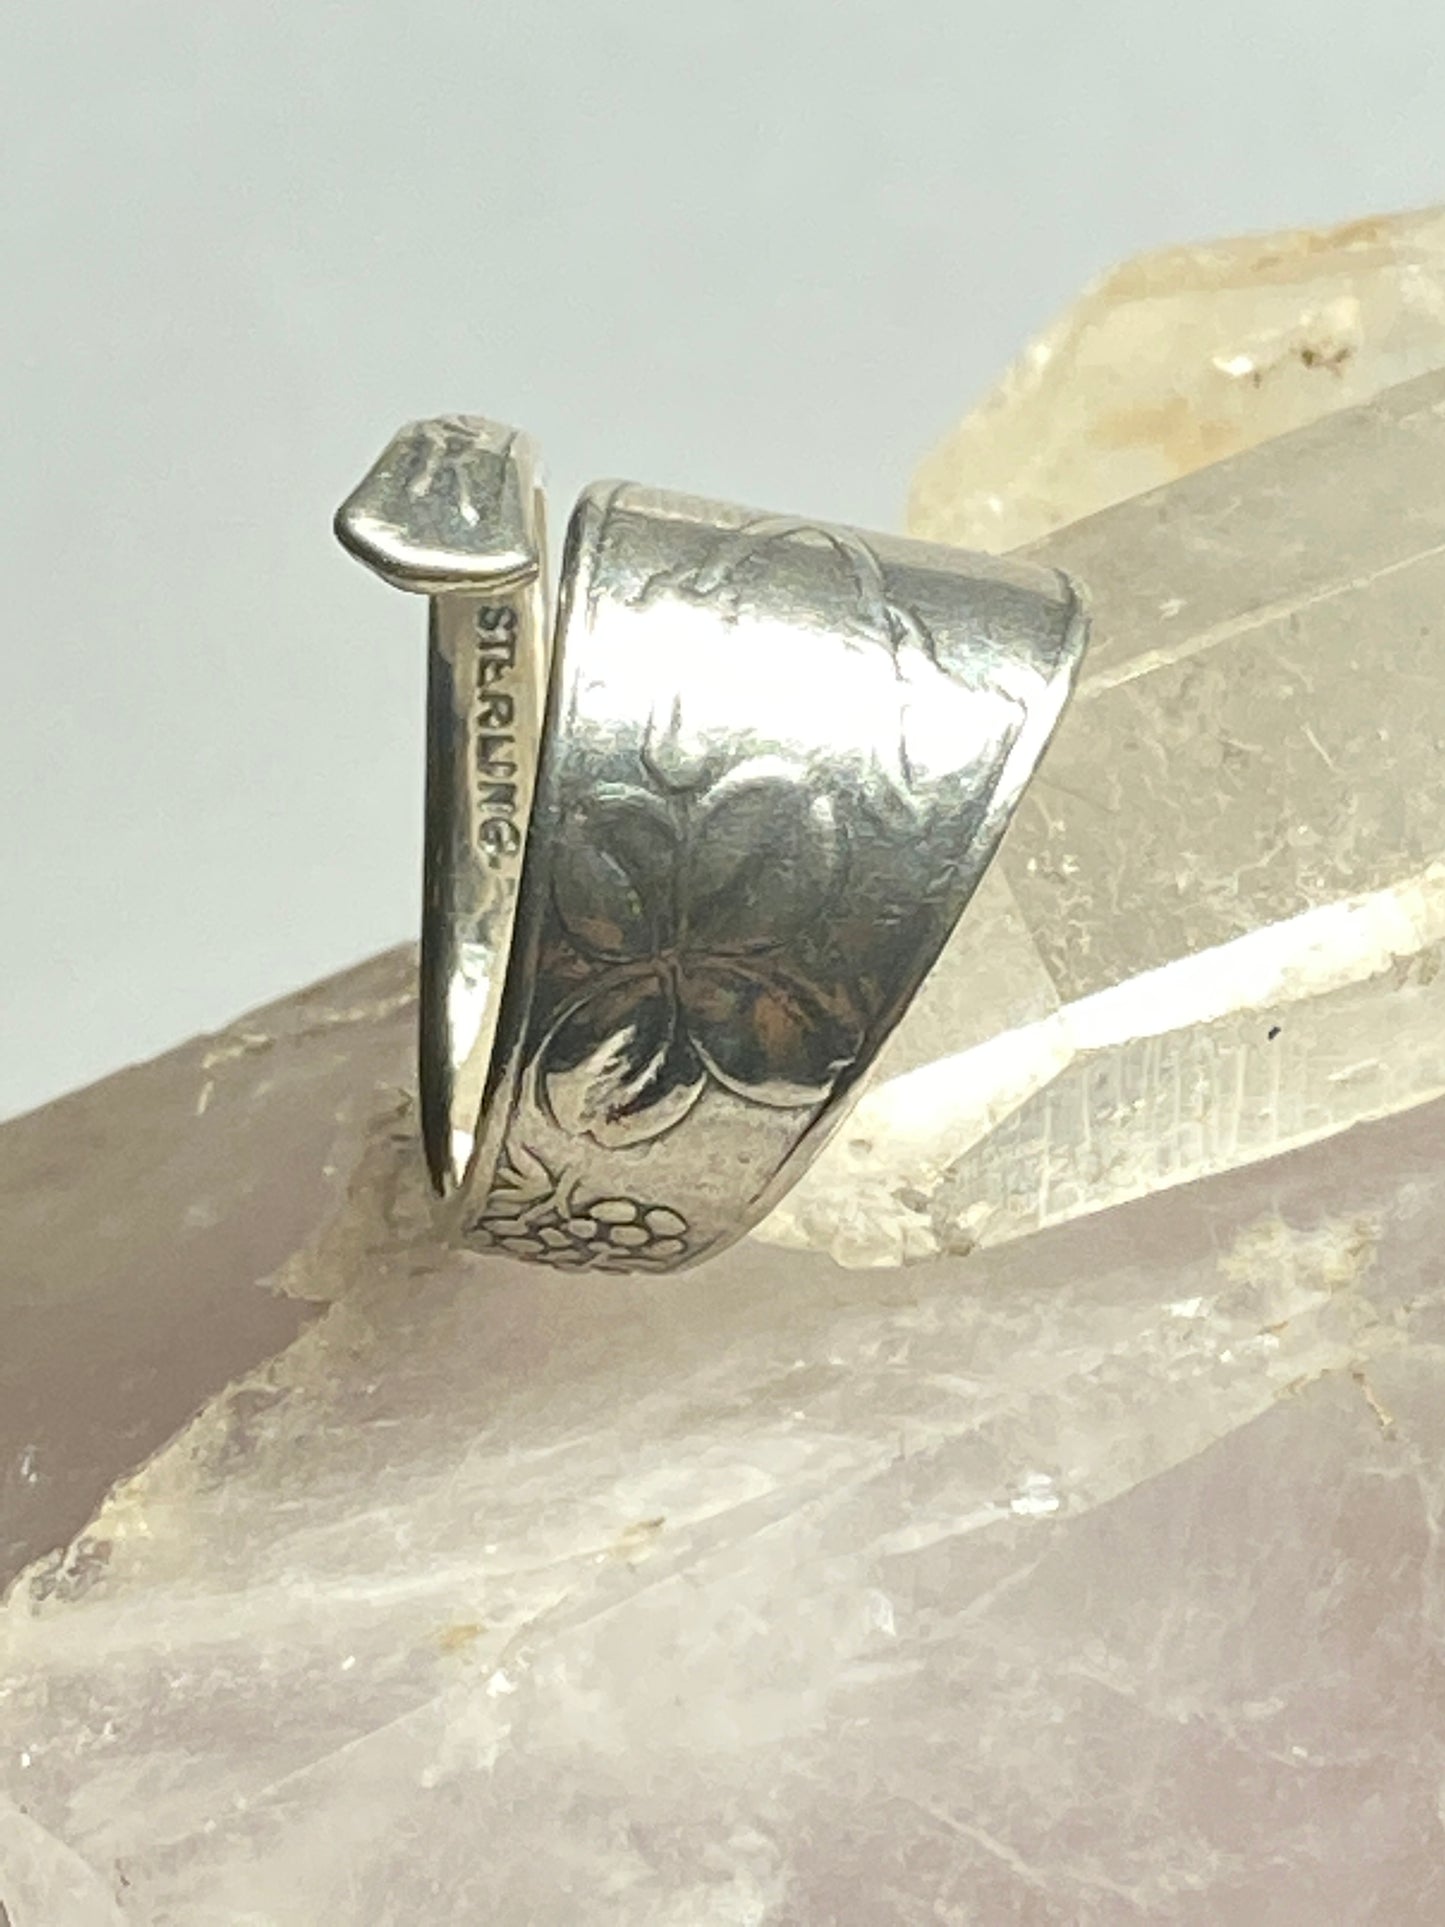 wishbone spoon ring 4 leaf clover band good luck sterling silver women